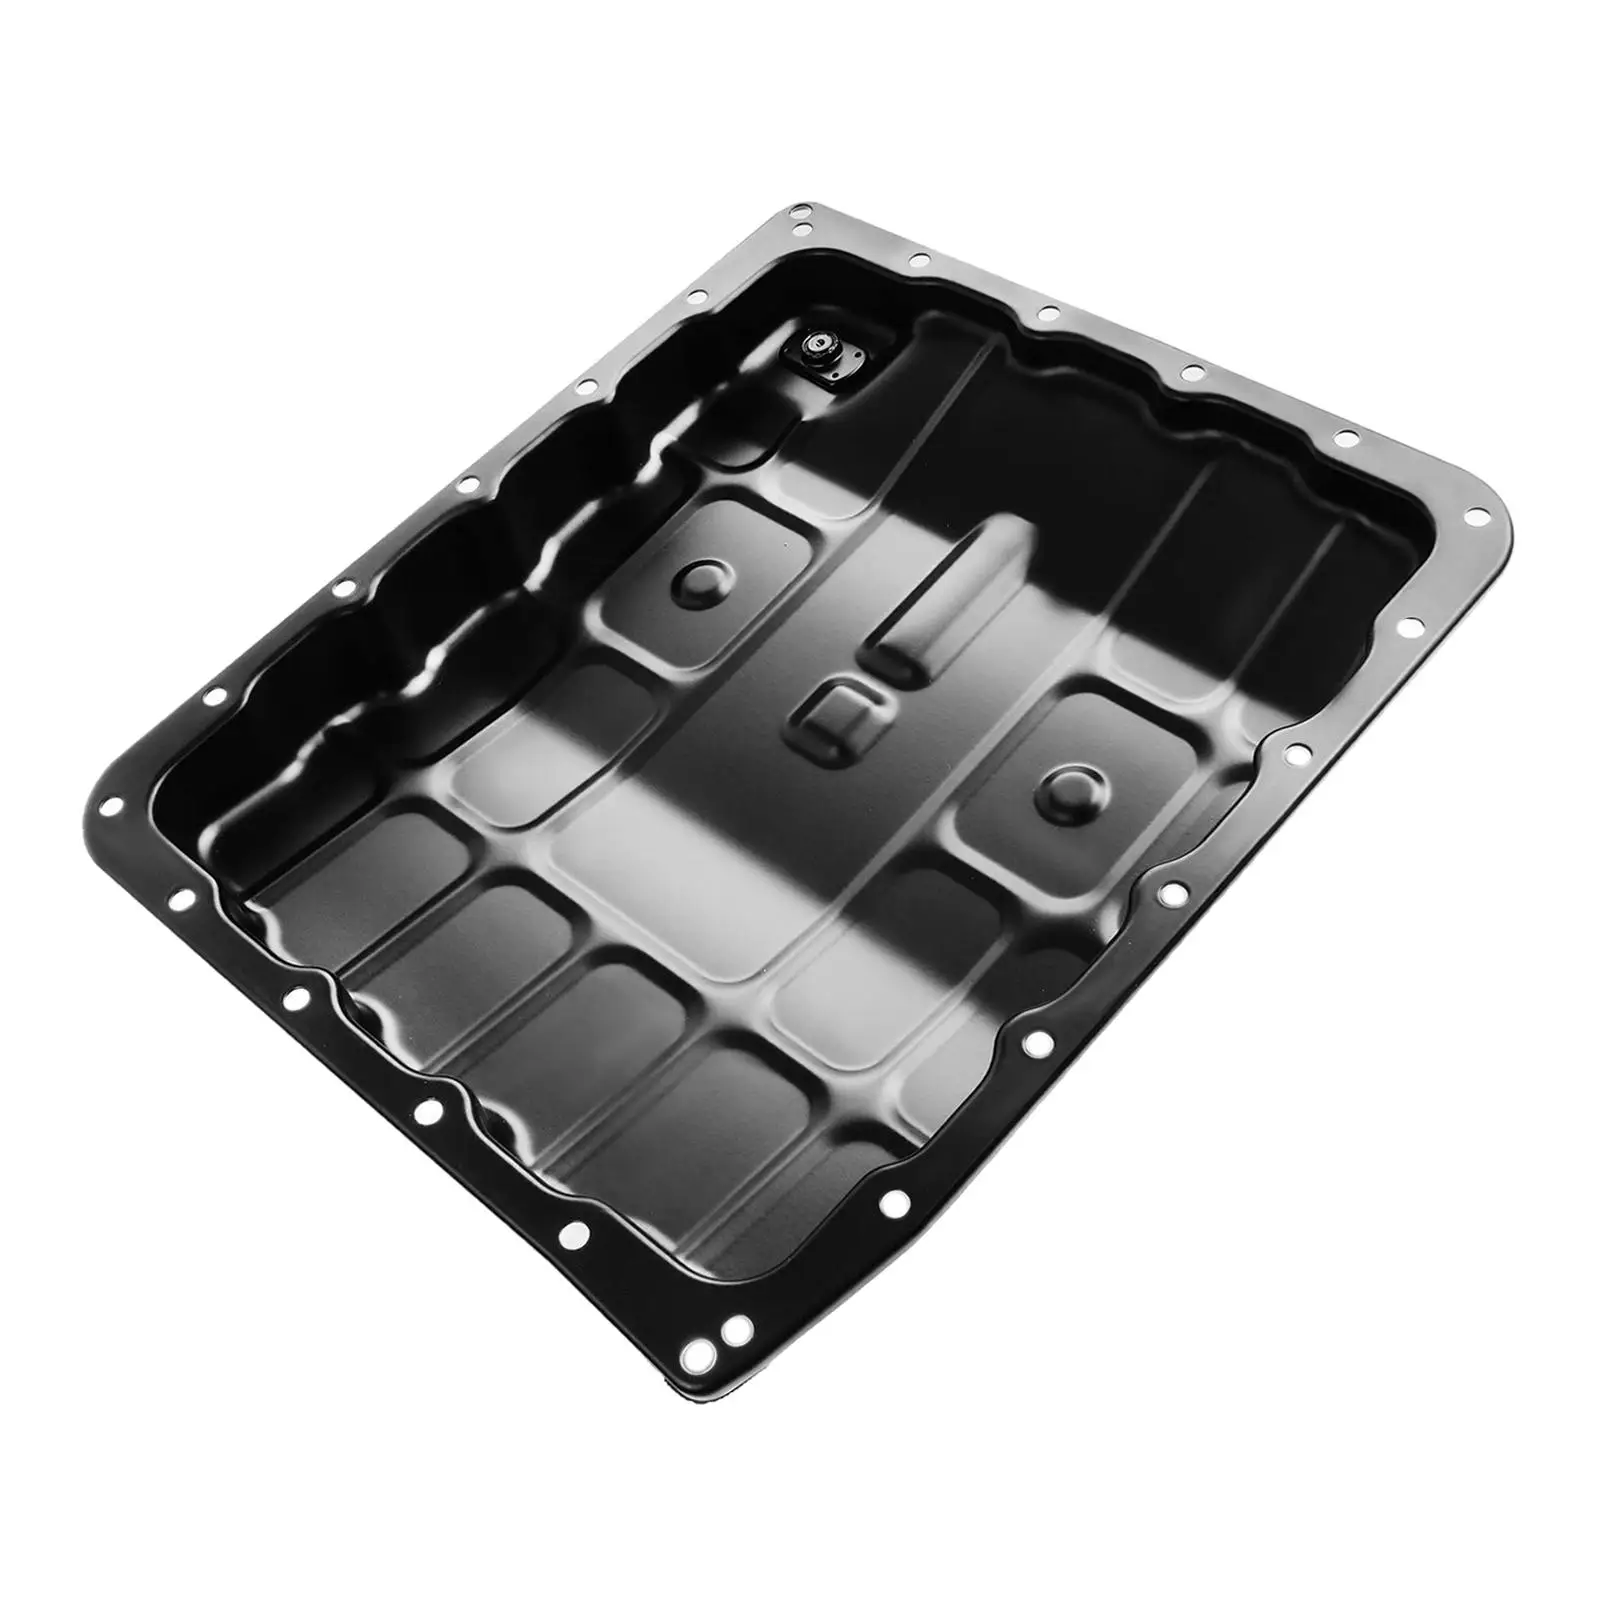 Transmission Oil Pan 3139090x0B Heavy Duty Easy to Install Supplies Replace Parts for Nissan 350Z Titan Pathfinder Armada